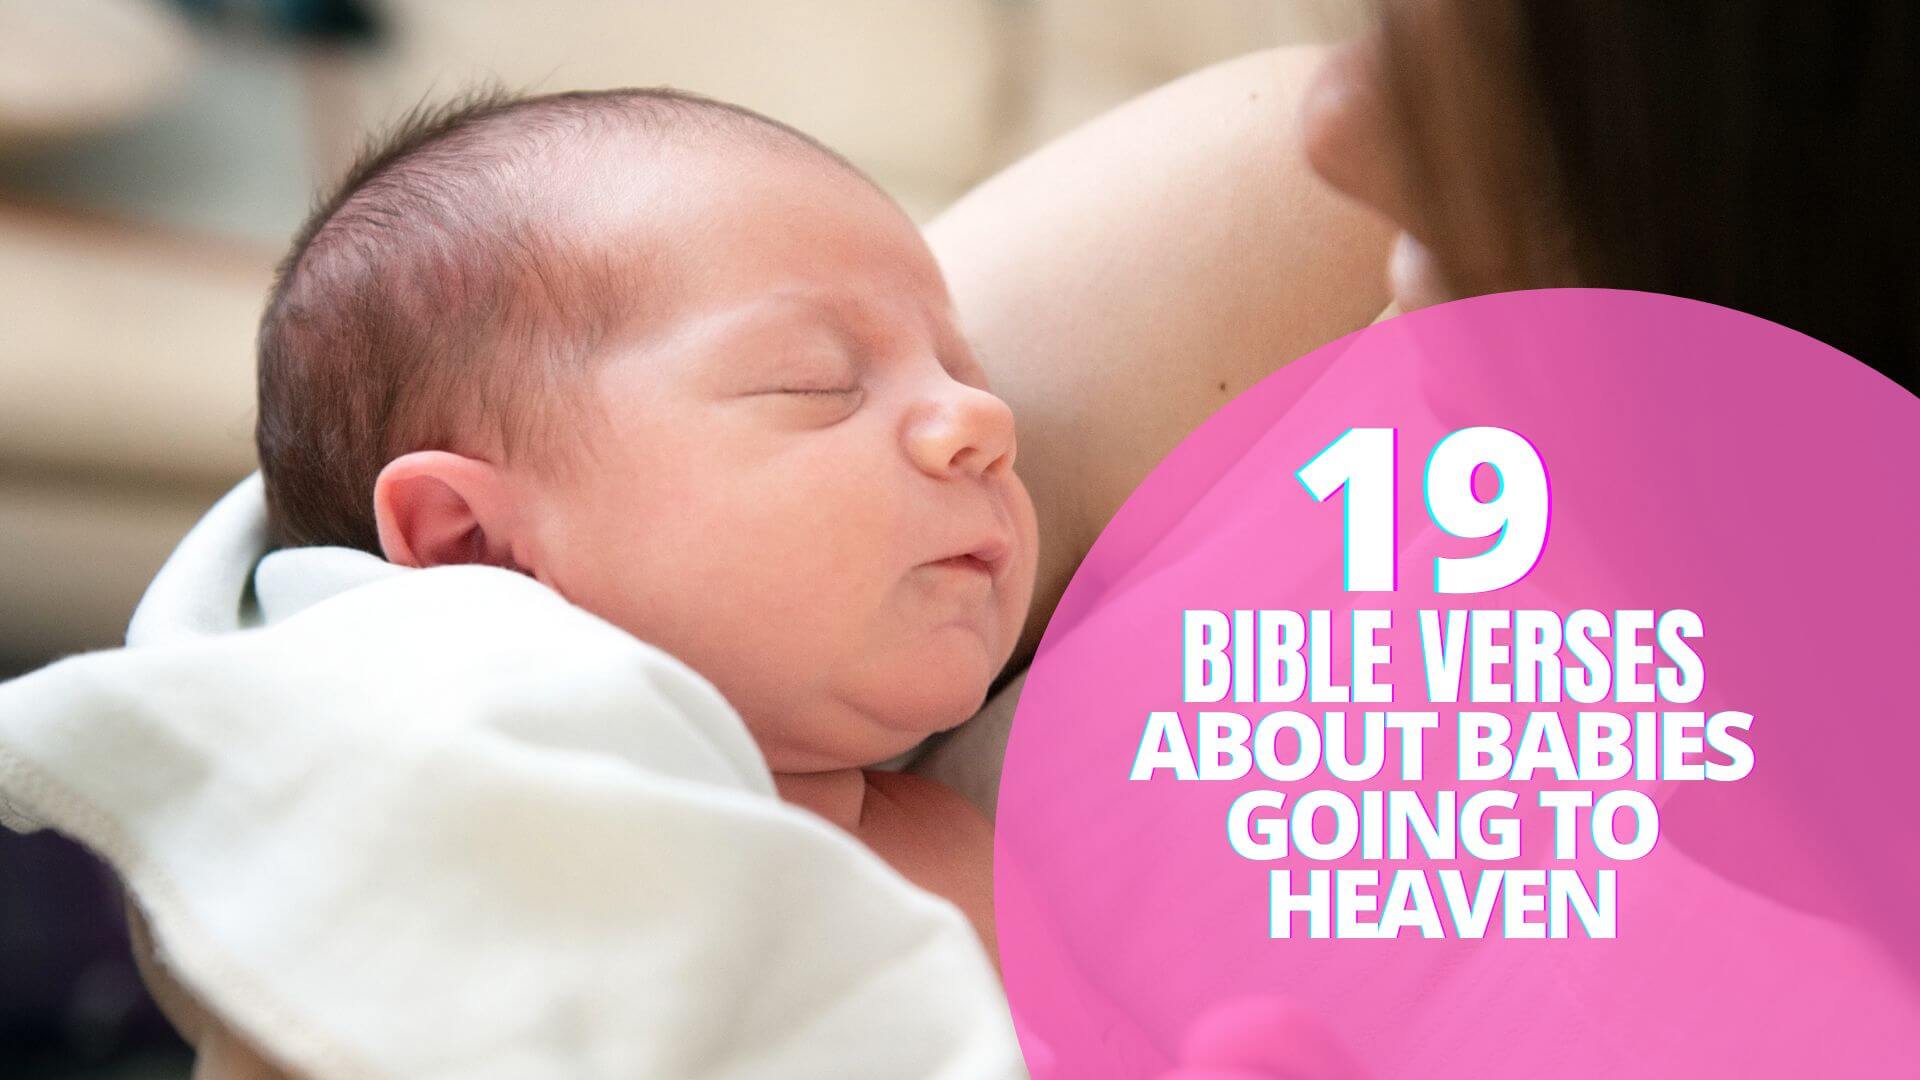 BIBLE VERSES ABOUT BABIES GOING TO HEAVEN